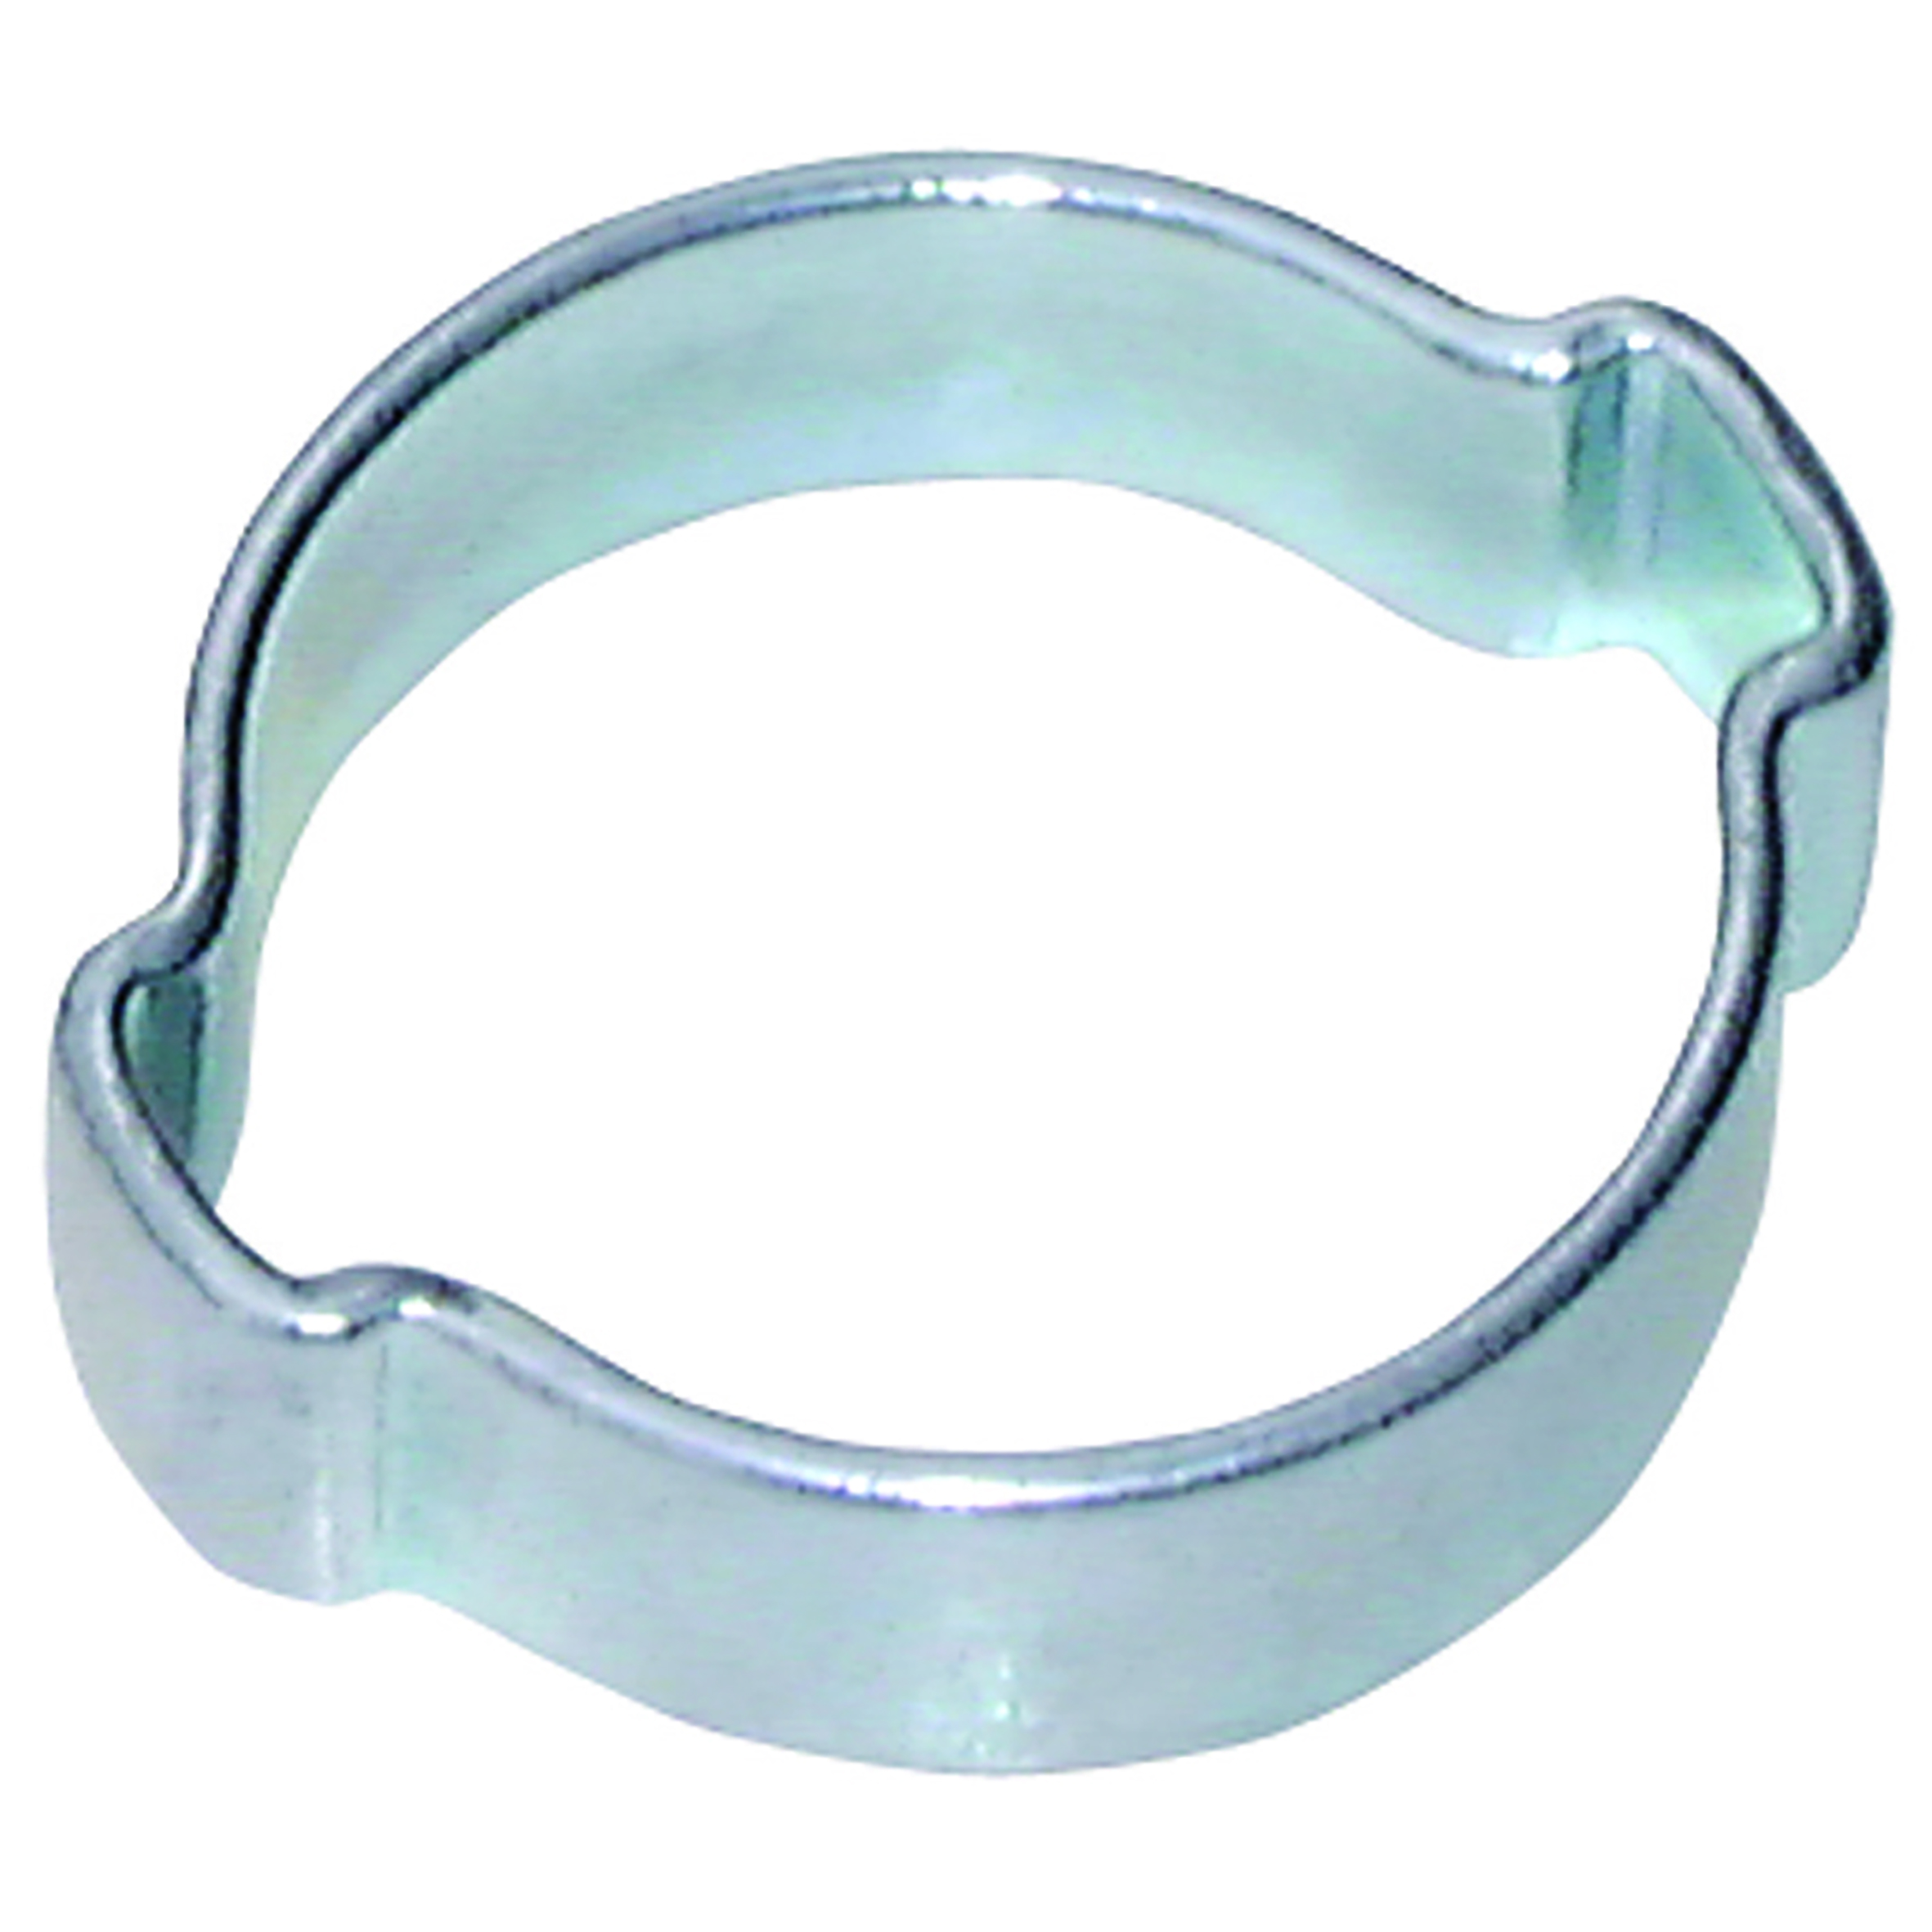 5.0-7.0MM 2-EAR STEEL CLAMP PLATED